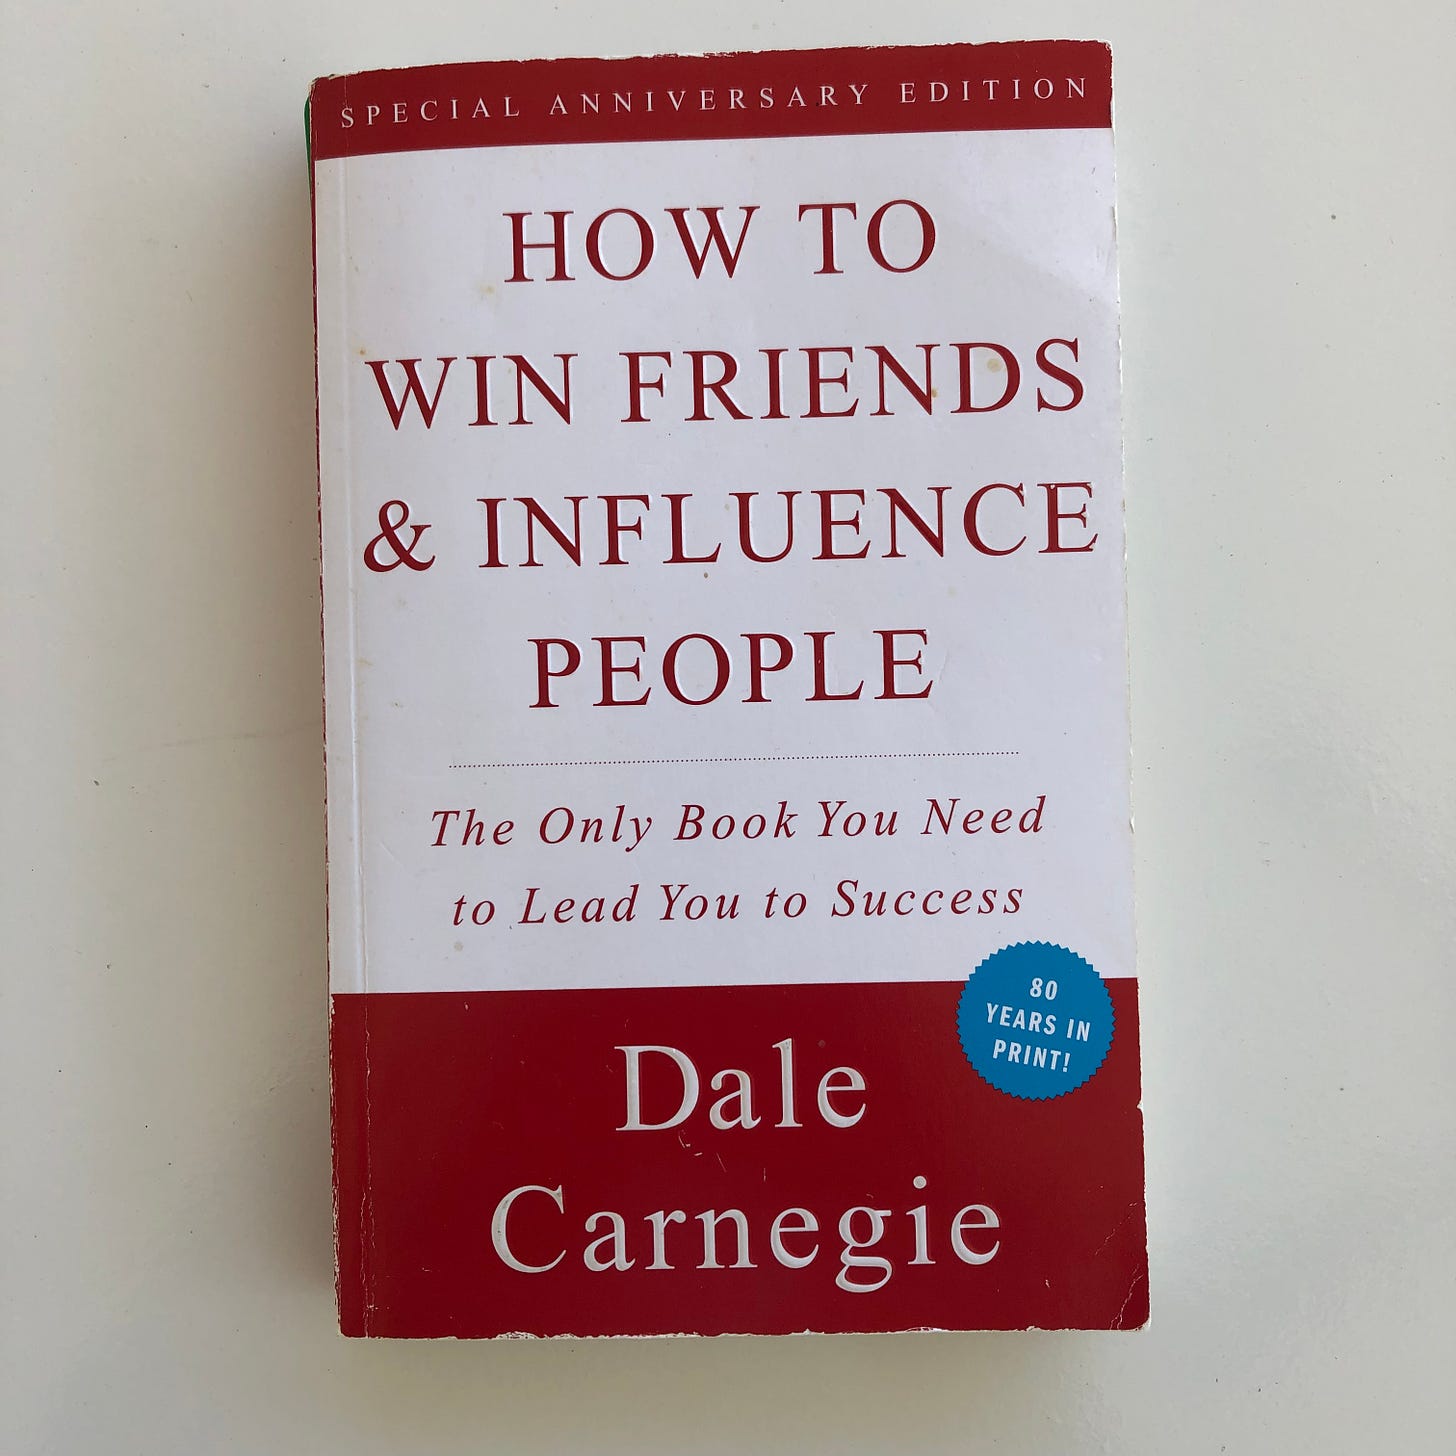 how to win friends and influence people by Dale Carnegie.